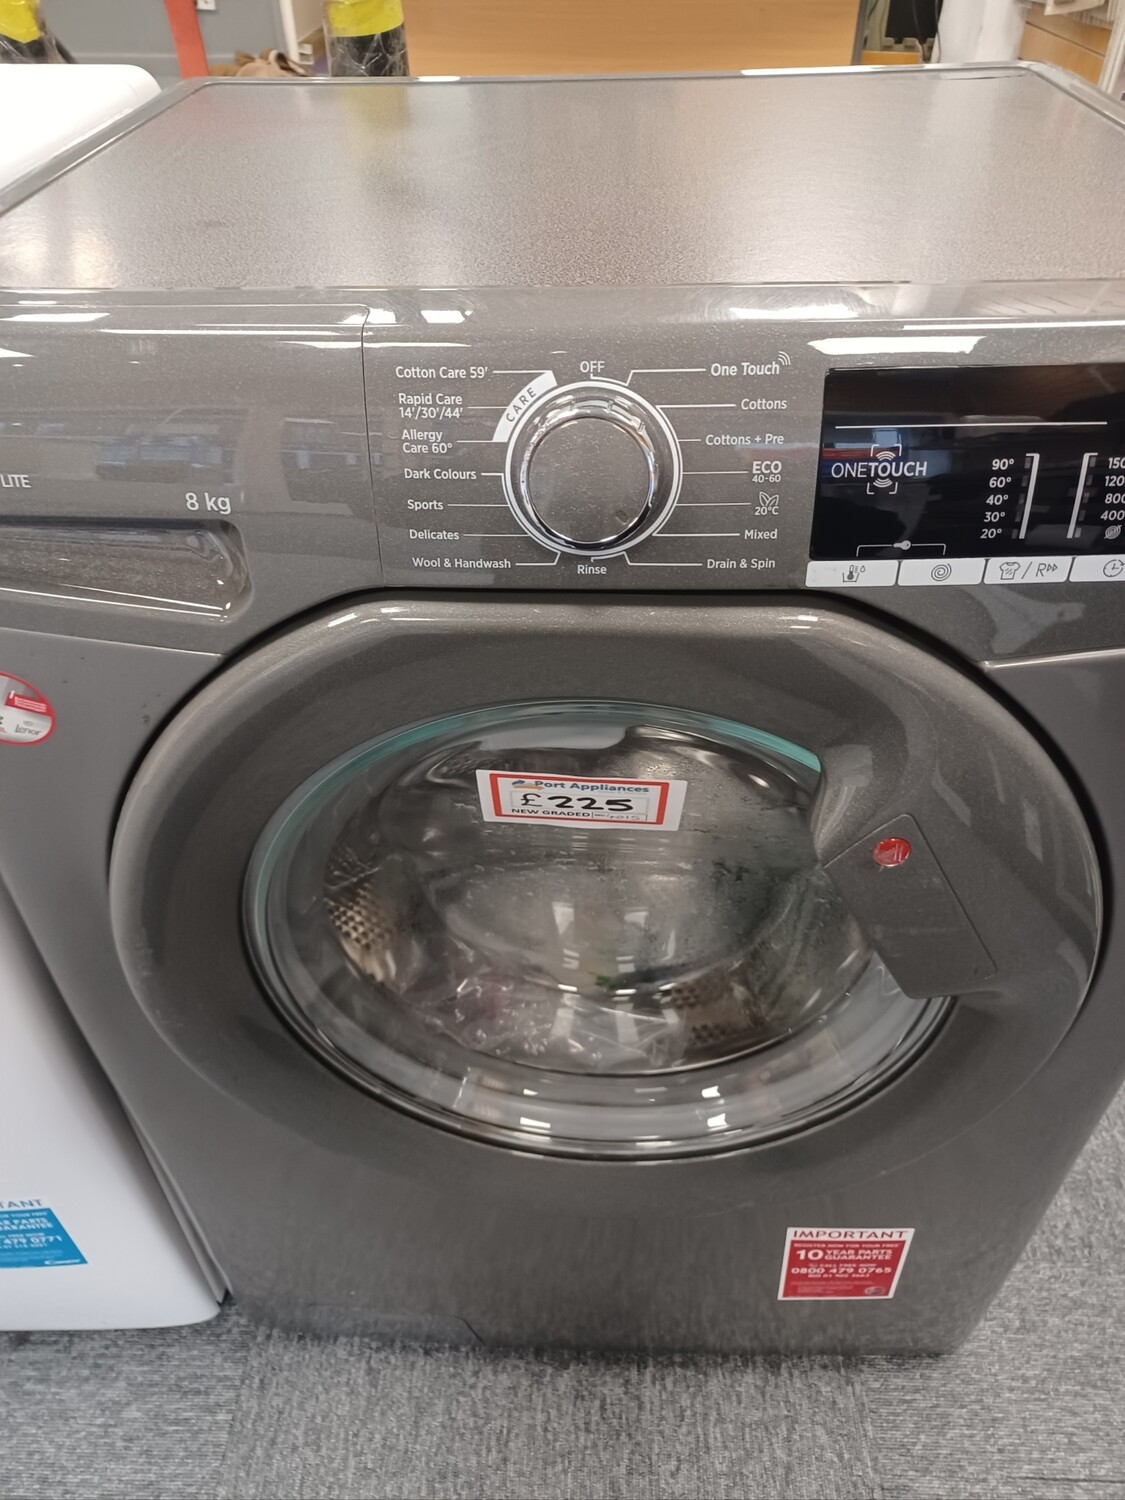 Hoover H3W58TGGE/-80 Freestanding 8KG 1500 Spin Washing Machine New Graded + 12 Month Guarantee